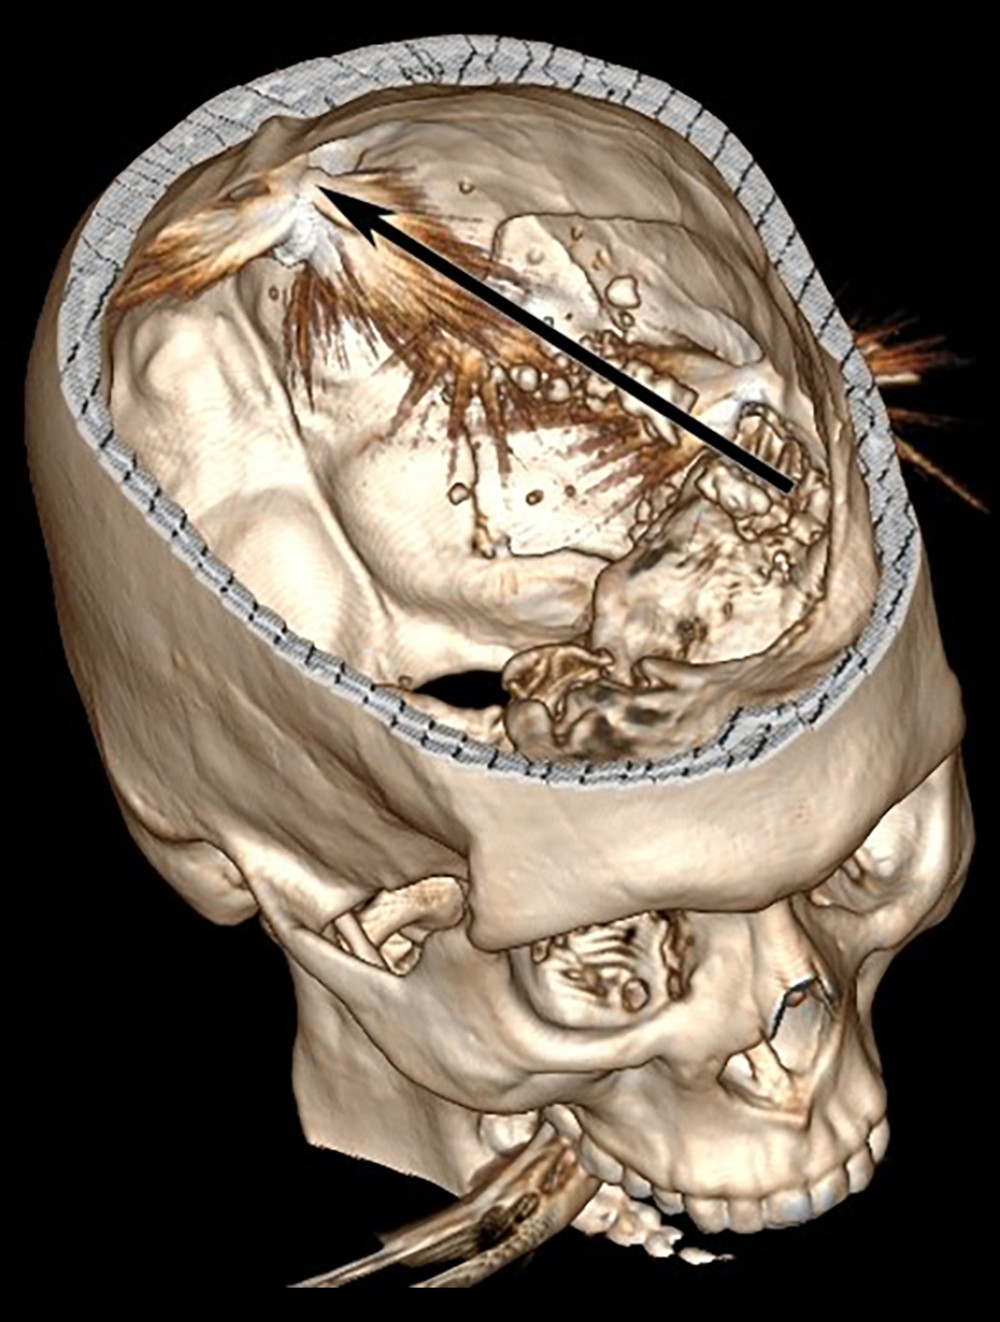 Three-dimensional reconstruction of the acute-phase computed tomography scan. Internal view of the entry point and projectiles’ location. The arrow represents the trajectory of the bullet.